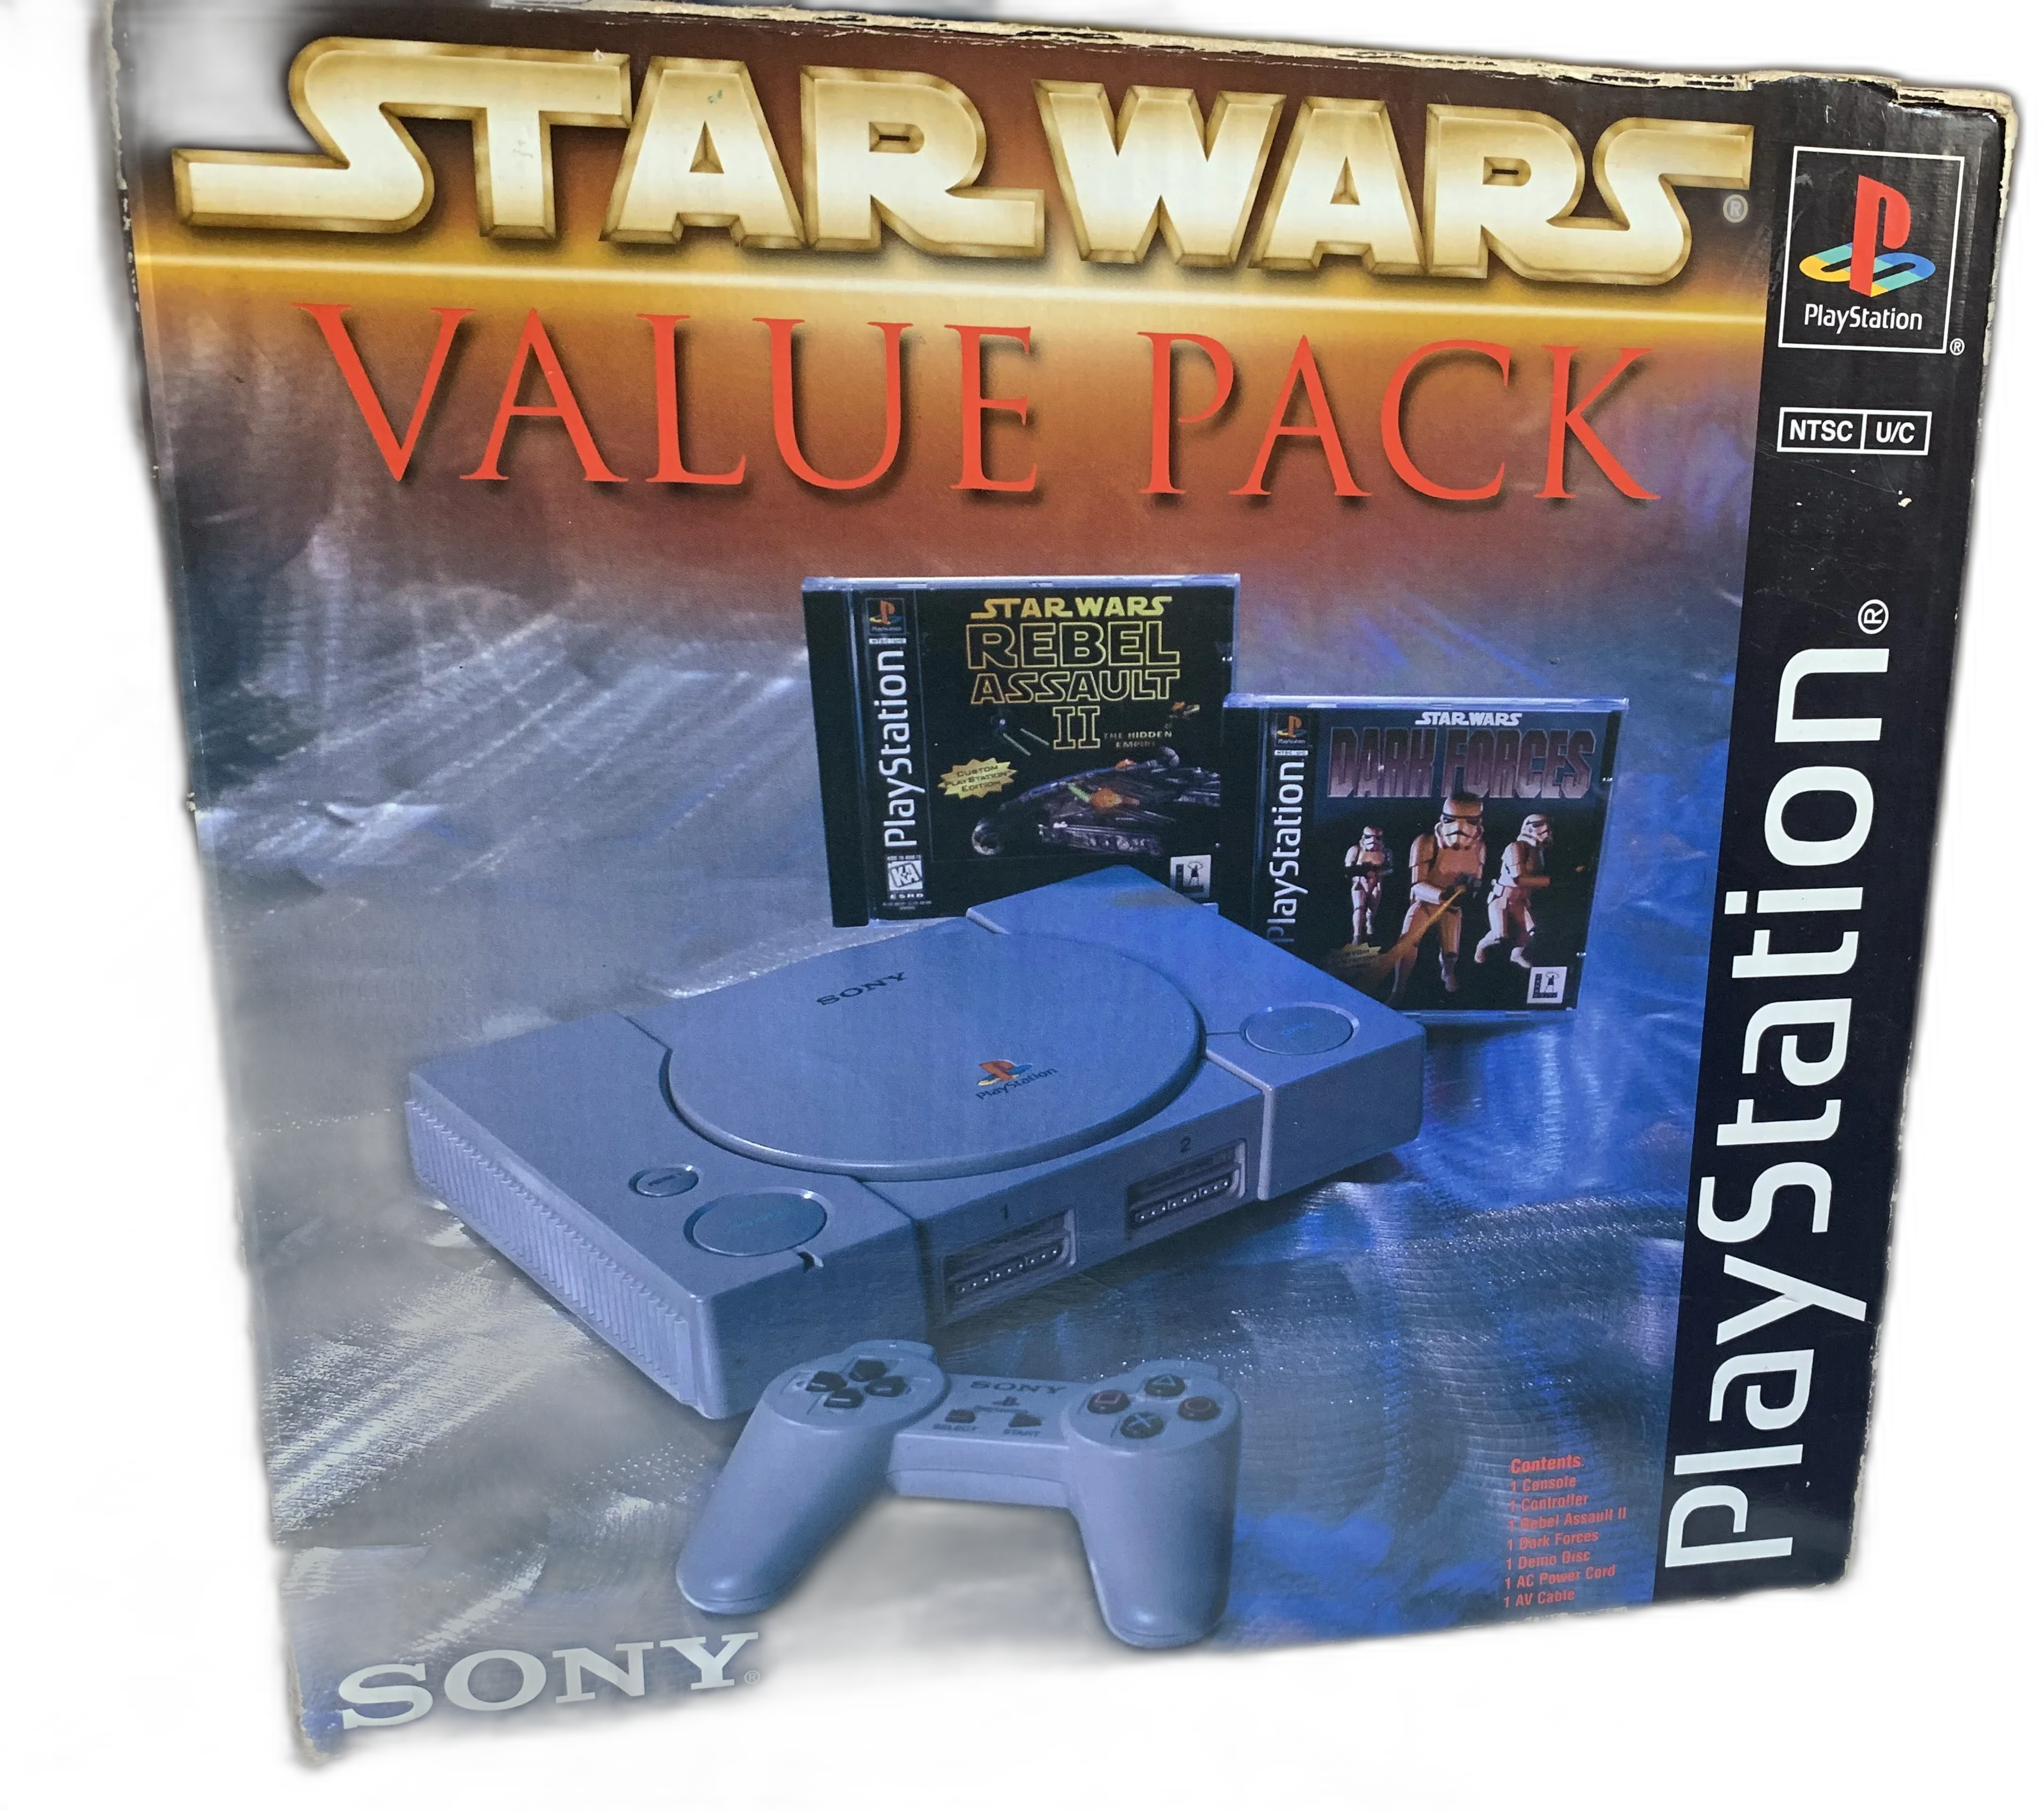  Sony PlayStation Star Wars Value Pack